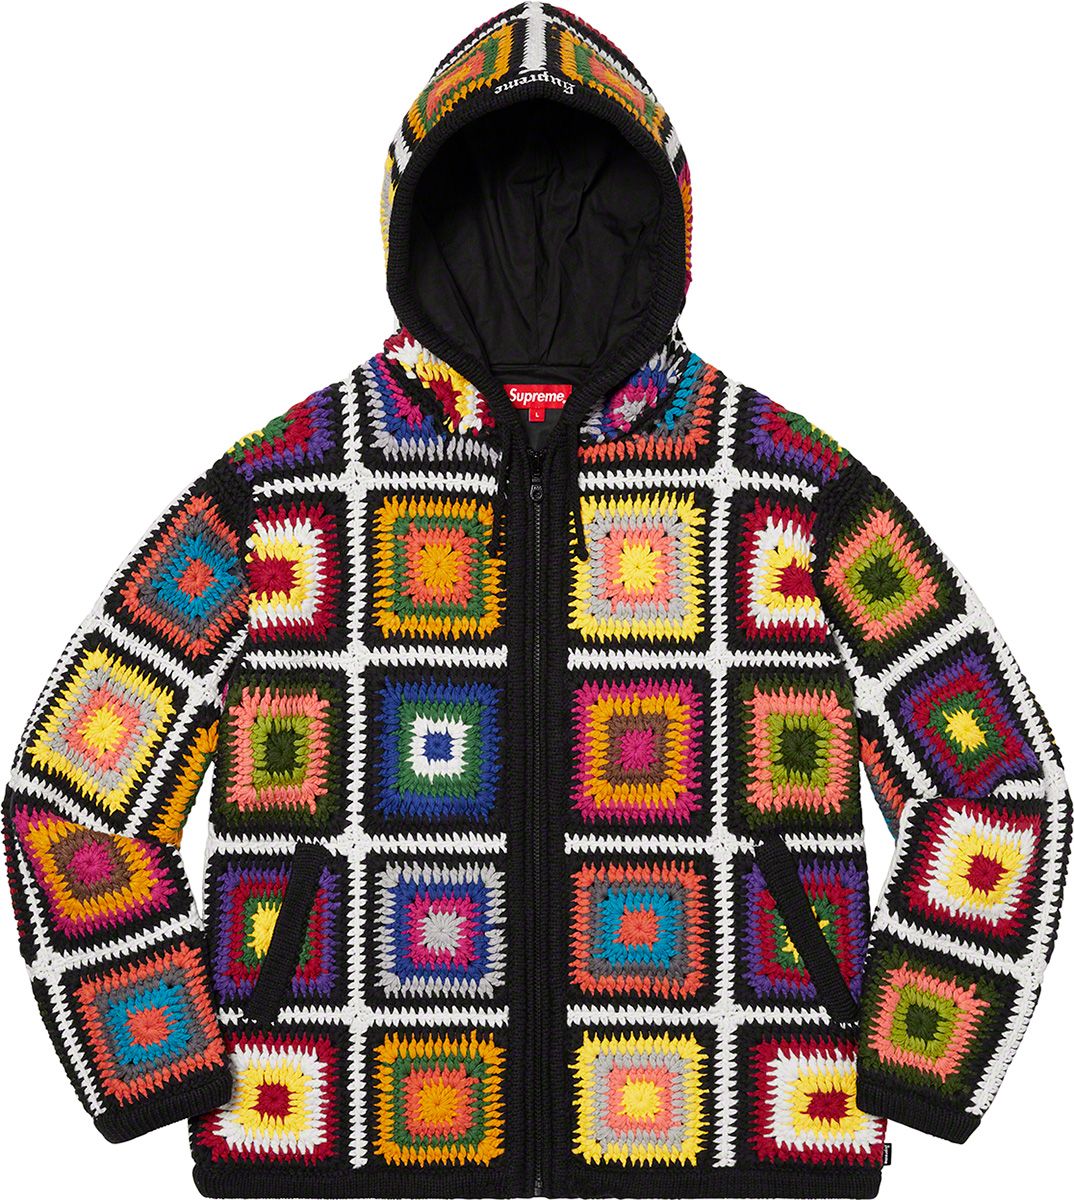 Crochet Hooded Zip Up Sweater - Fall/Winter 2020 Preview – Supreme